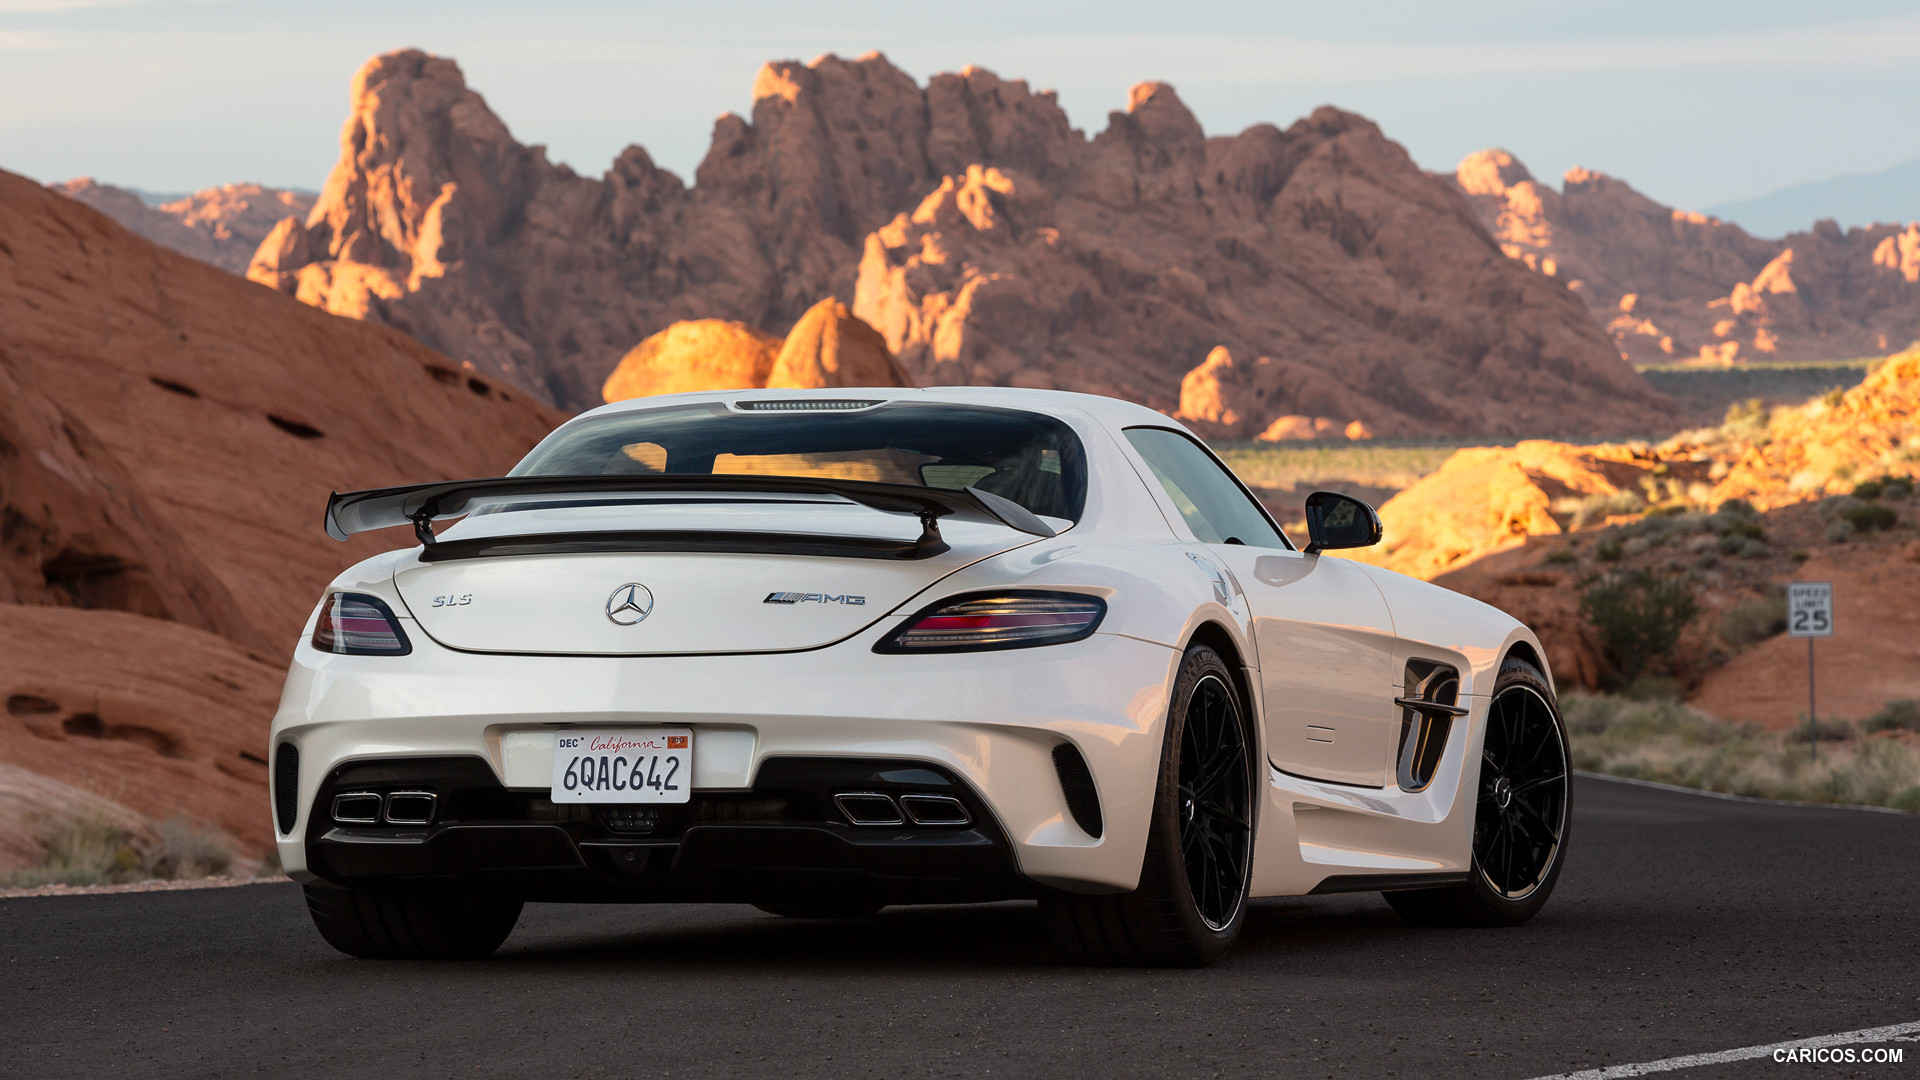 2014 Mercedes-Benz SLS AMG Coupe Black Series White - Rear, #11 of 40